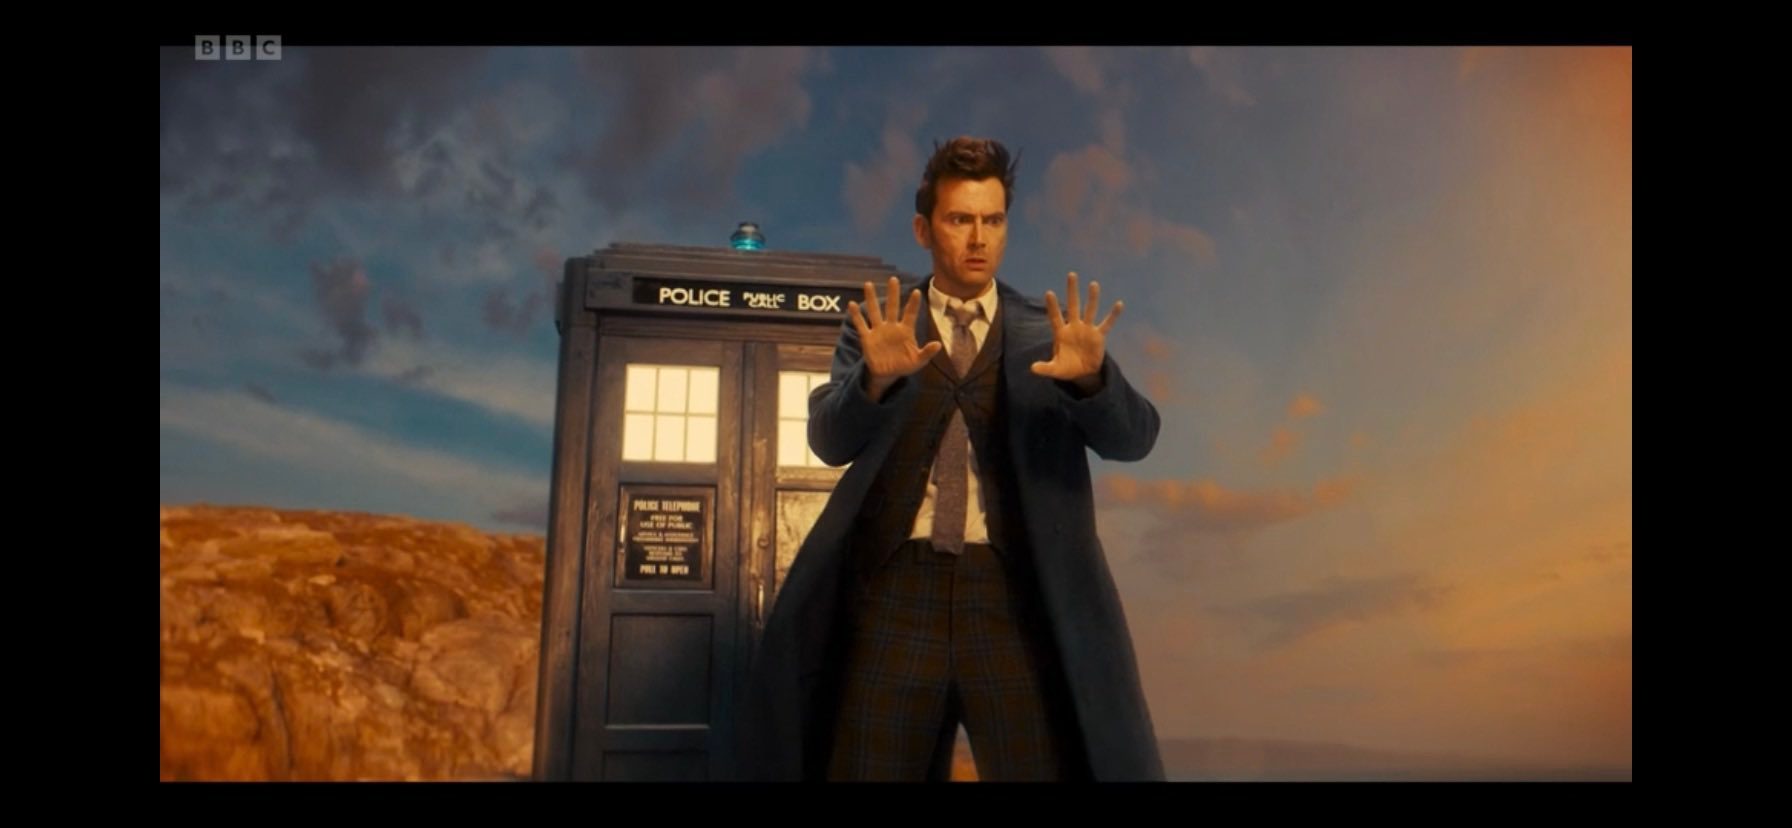 WATCH: ‘Doctor Who’ confirms return of David Tennant as The Doctor